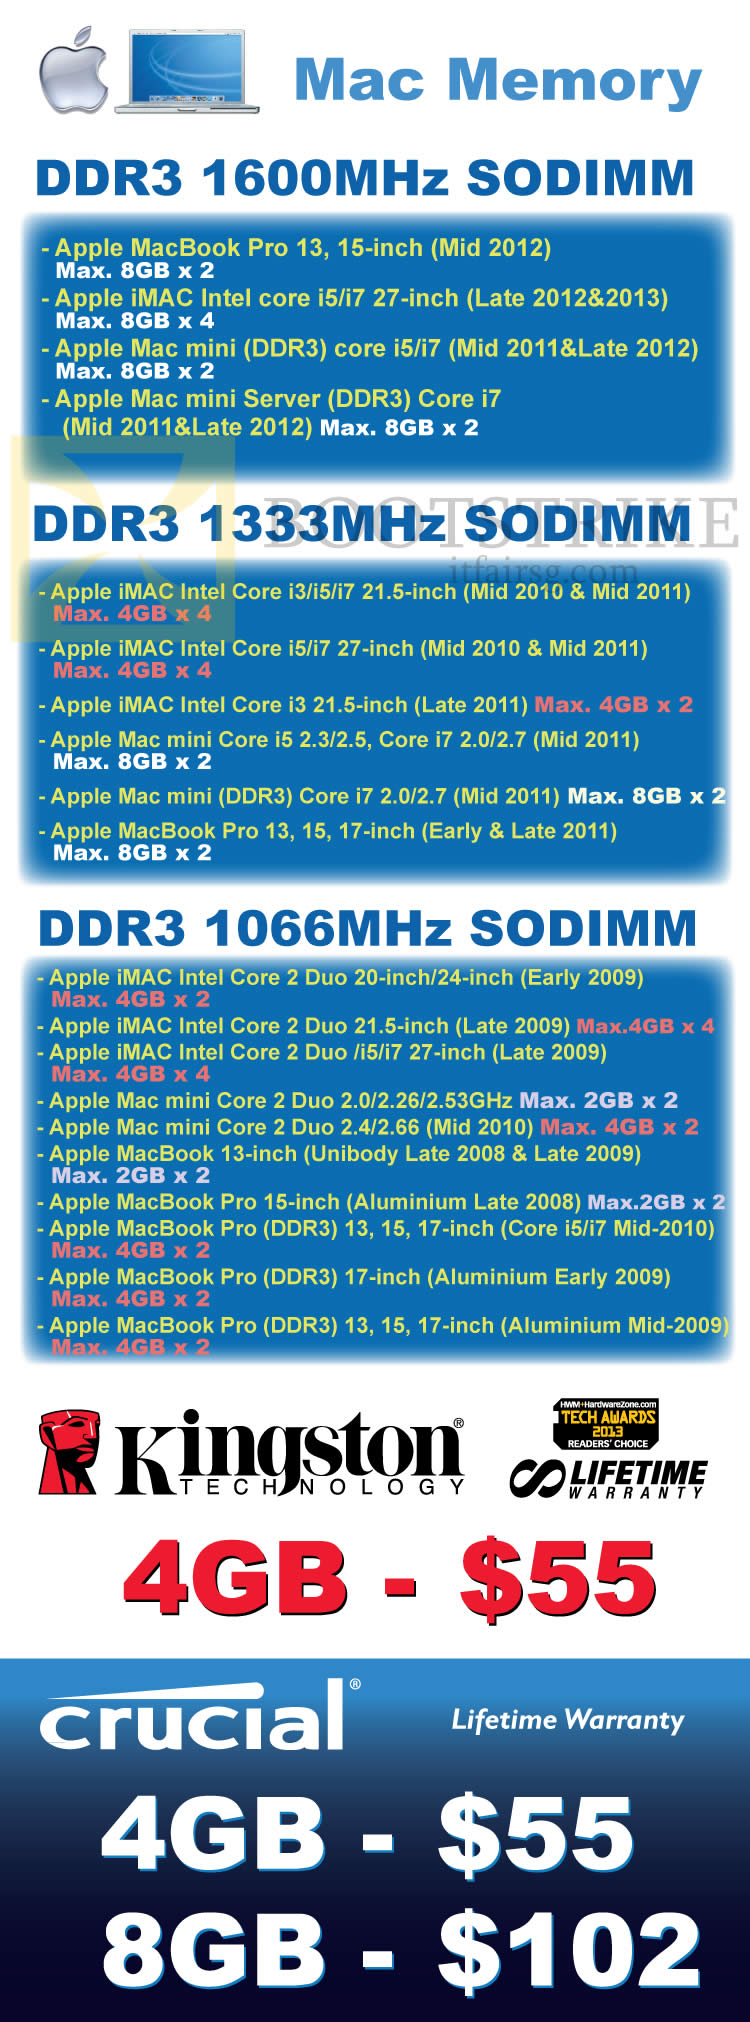 COMEX 2014 price list image brochure of Convergent Kingston Mac Memory RAM DDR3, Crucial